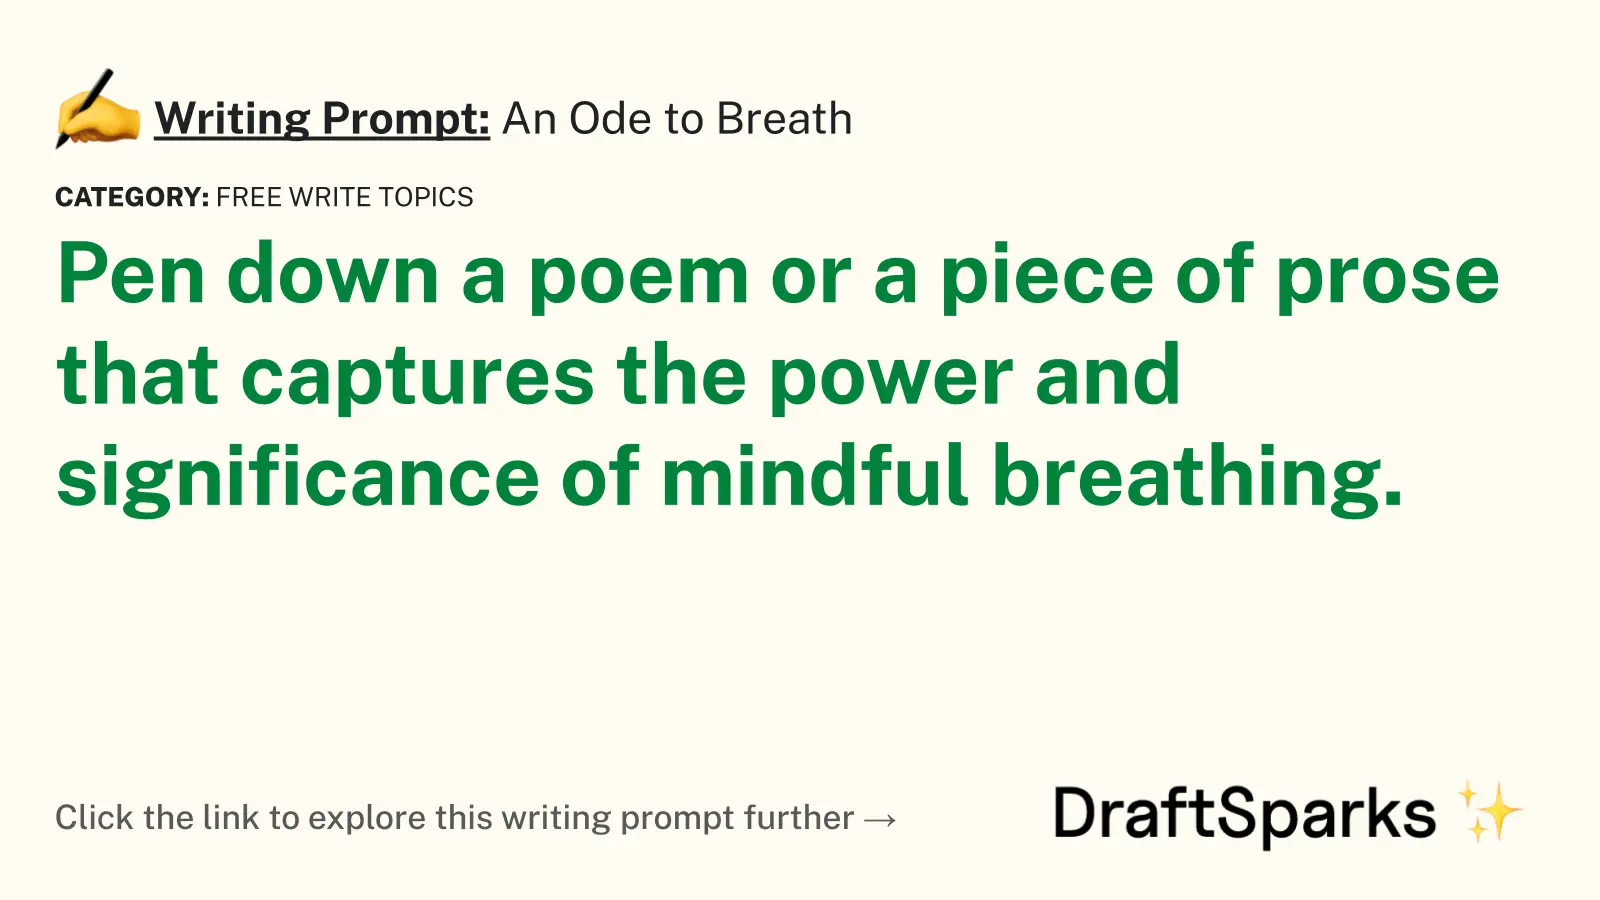 An Ode to Breath